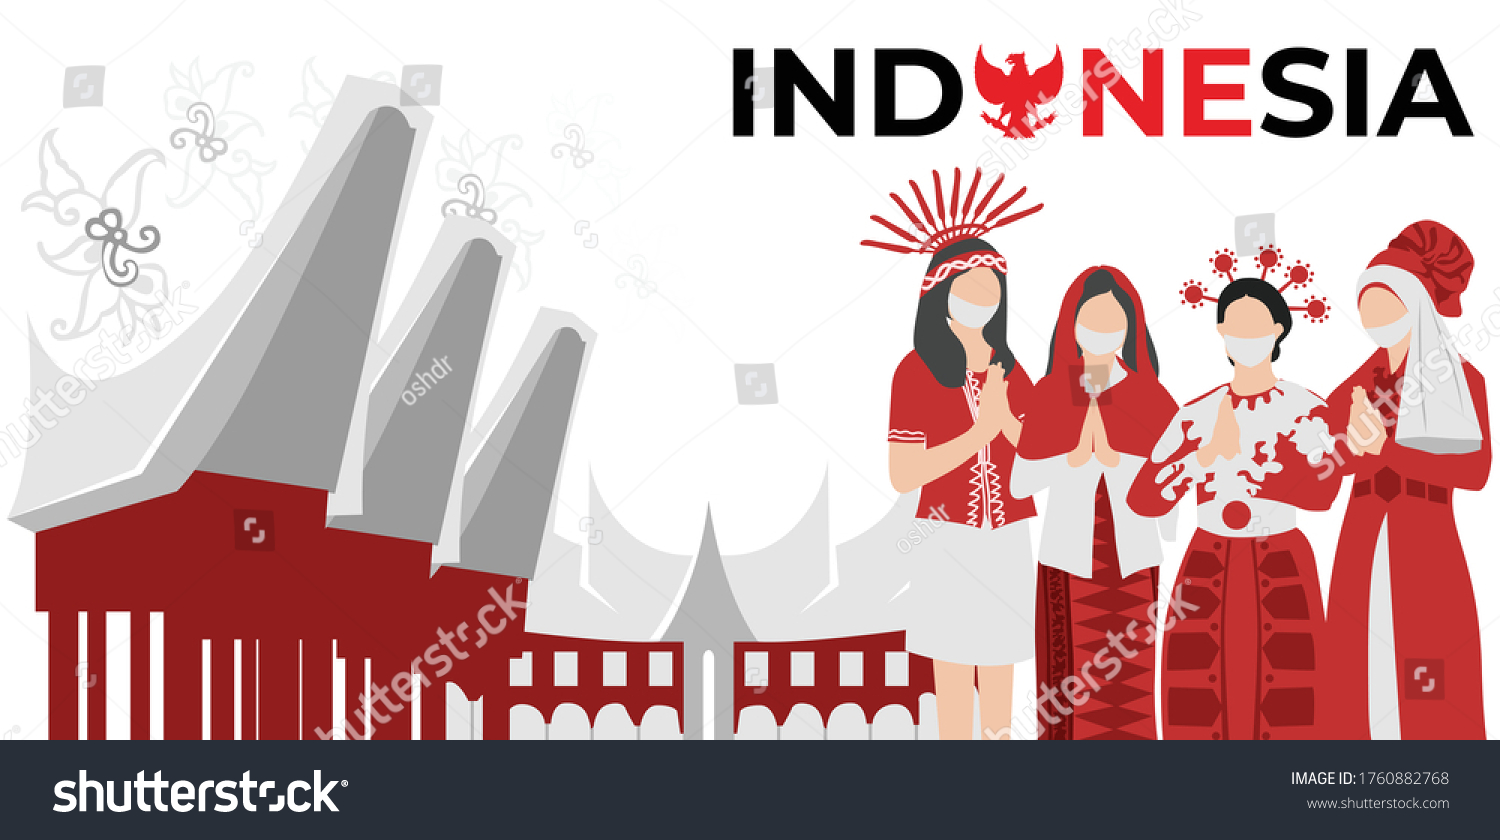 SVG of Illustration of Indonesian women dressed in traditional clothing with a house background. svg